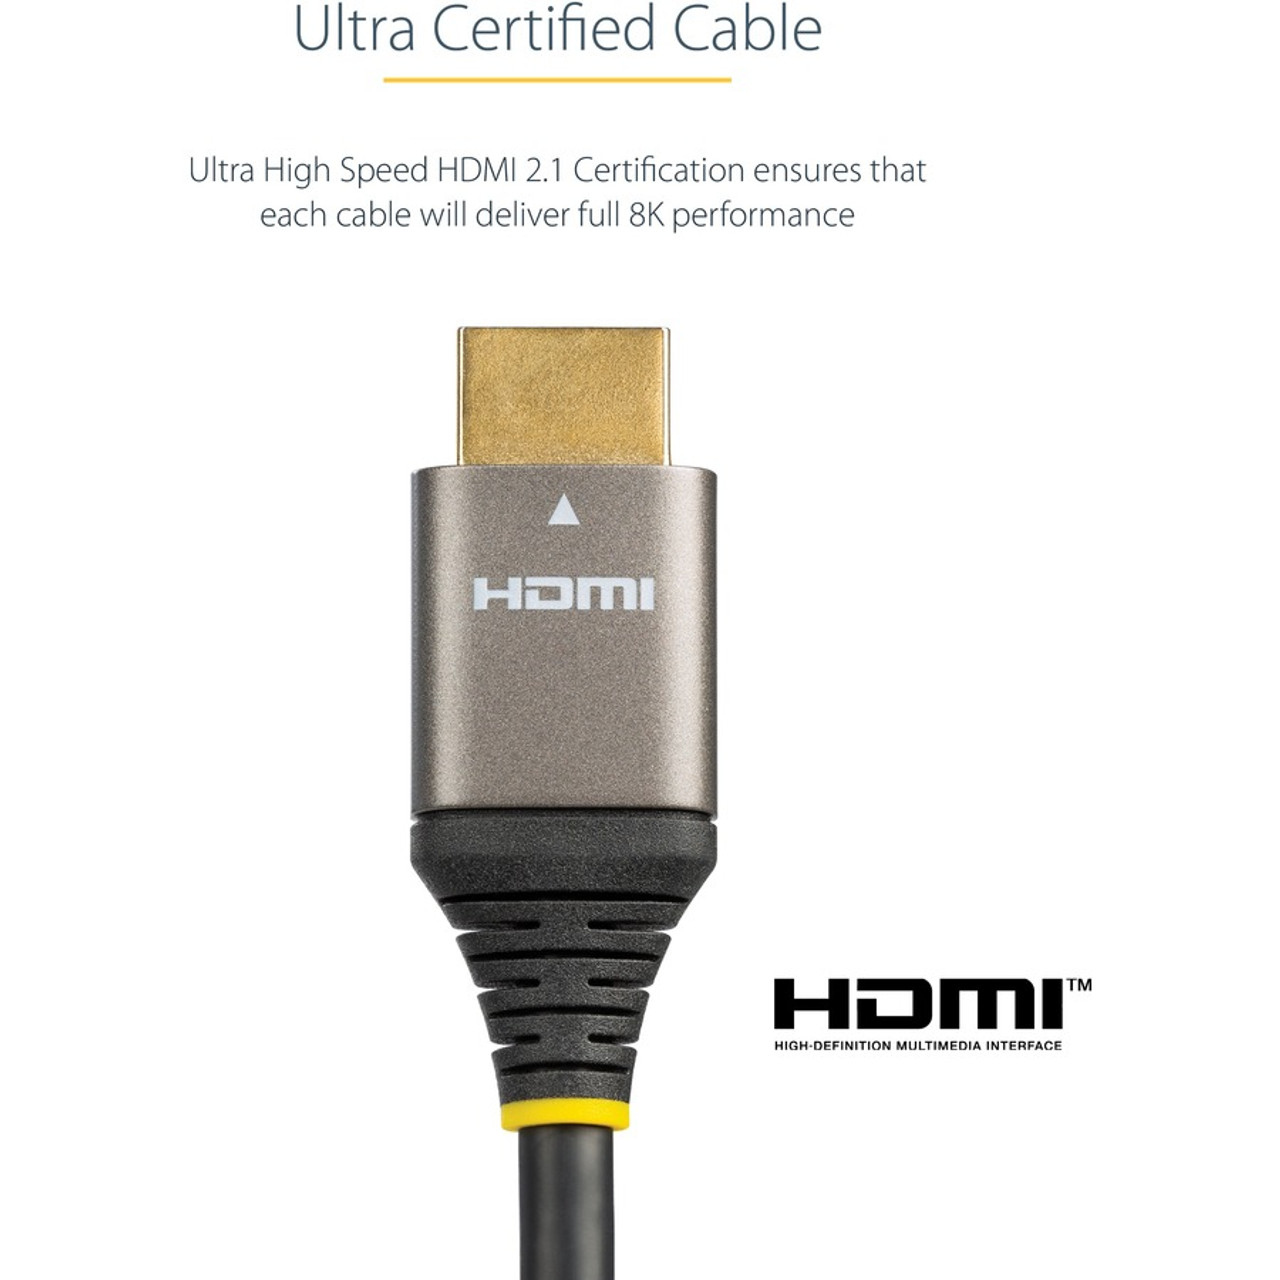 StarTech.com 10ft/3m HDMI 2.1 Cable, Certified Ultra